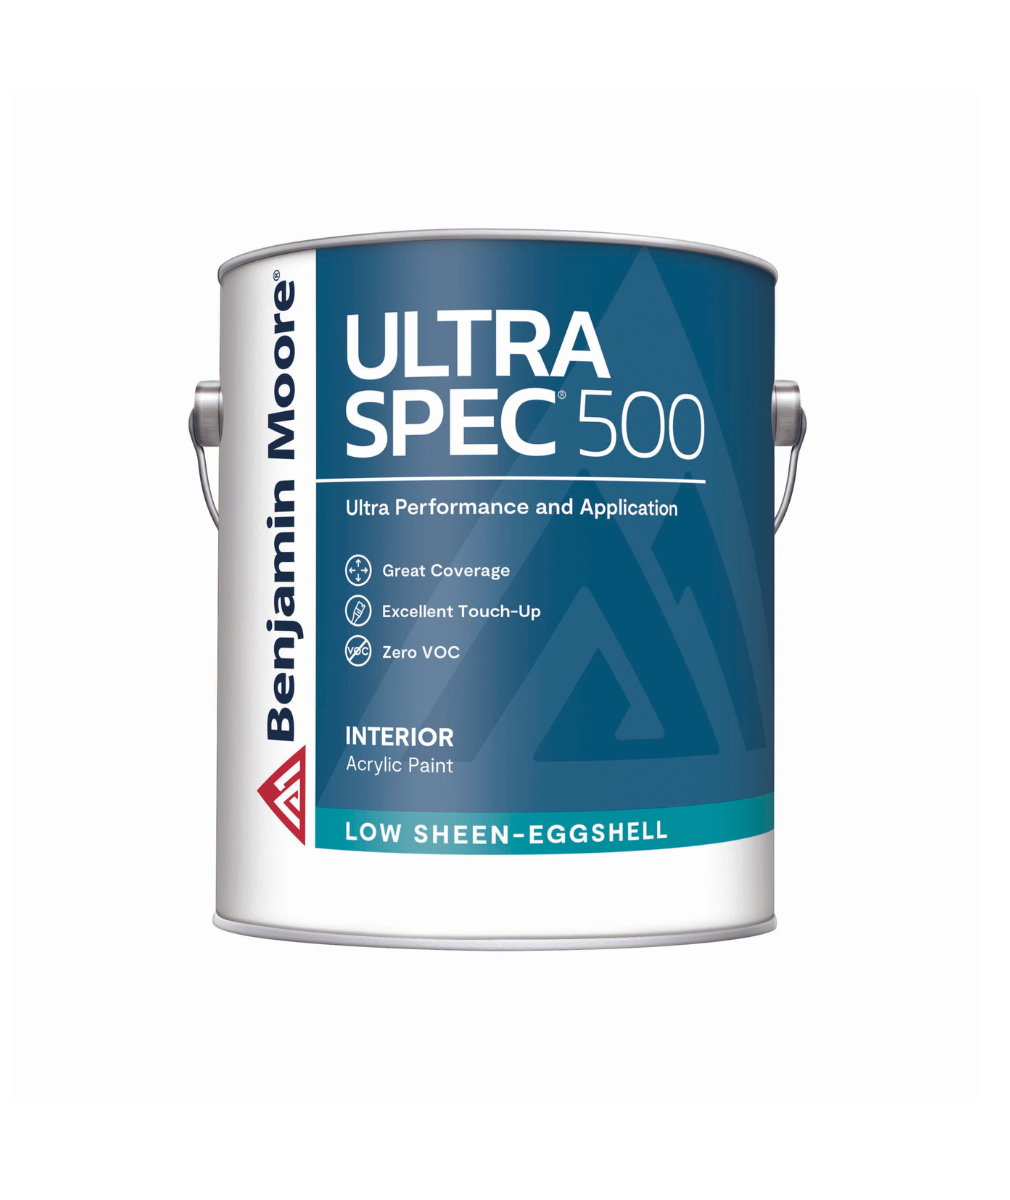 Benjamin Moore Ultra Spec 500 Low Sheen-Eggshell Interior Paint available at JC Licht.